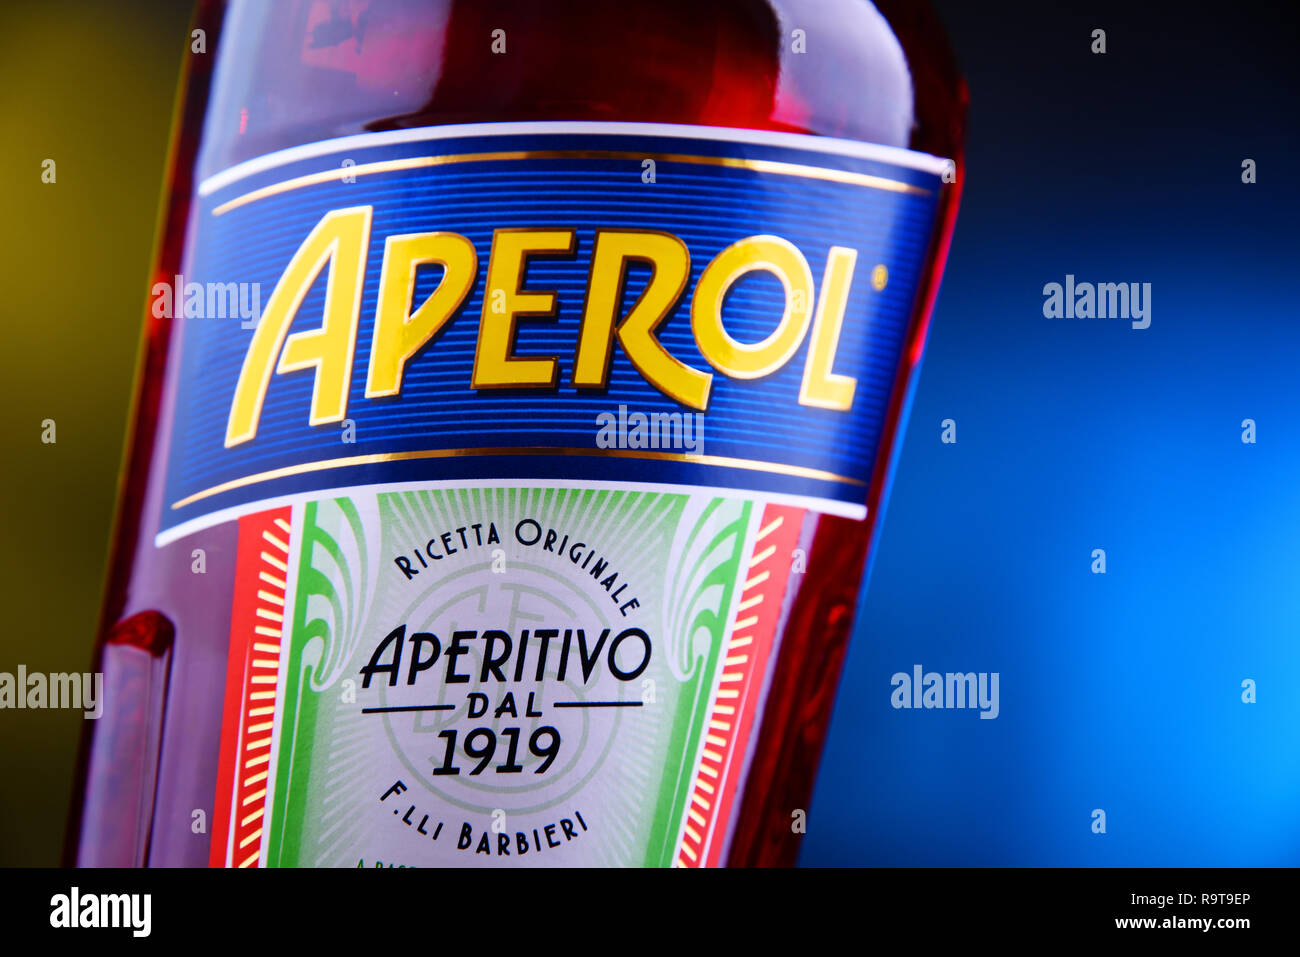 POZNAN, POL - NOV 29, 2018: Bottle of Aperol, an Italian aperitif made of gentian, rhubarb, and cinchona, It is produced by the Campari company. Stock Photo